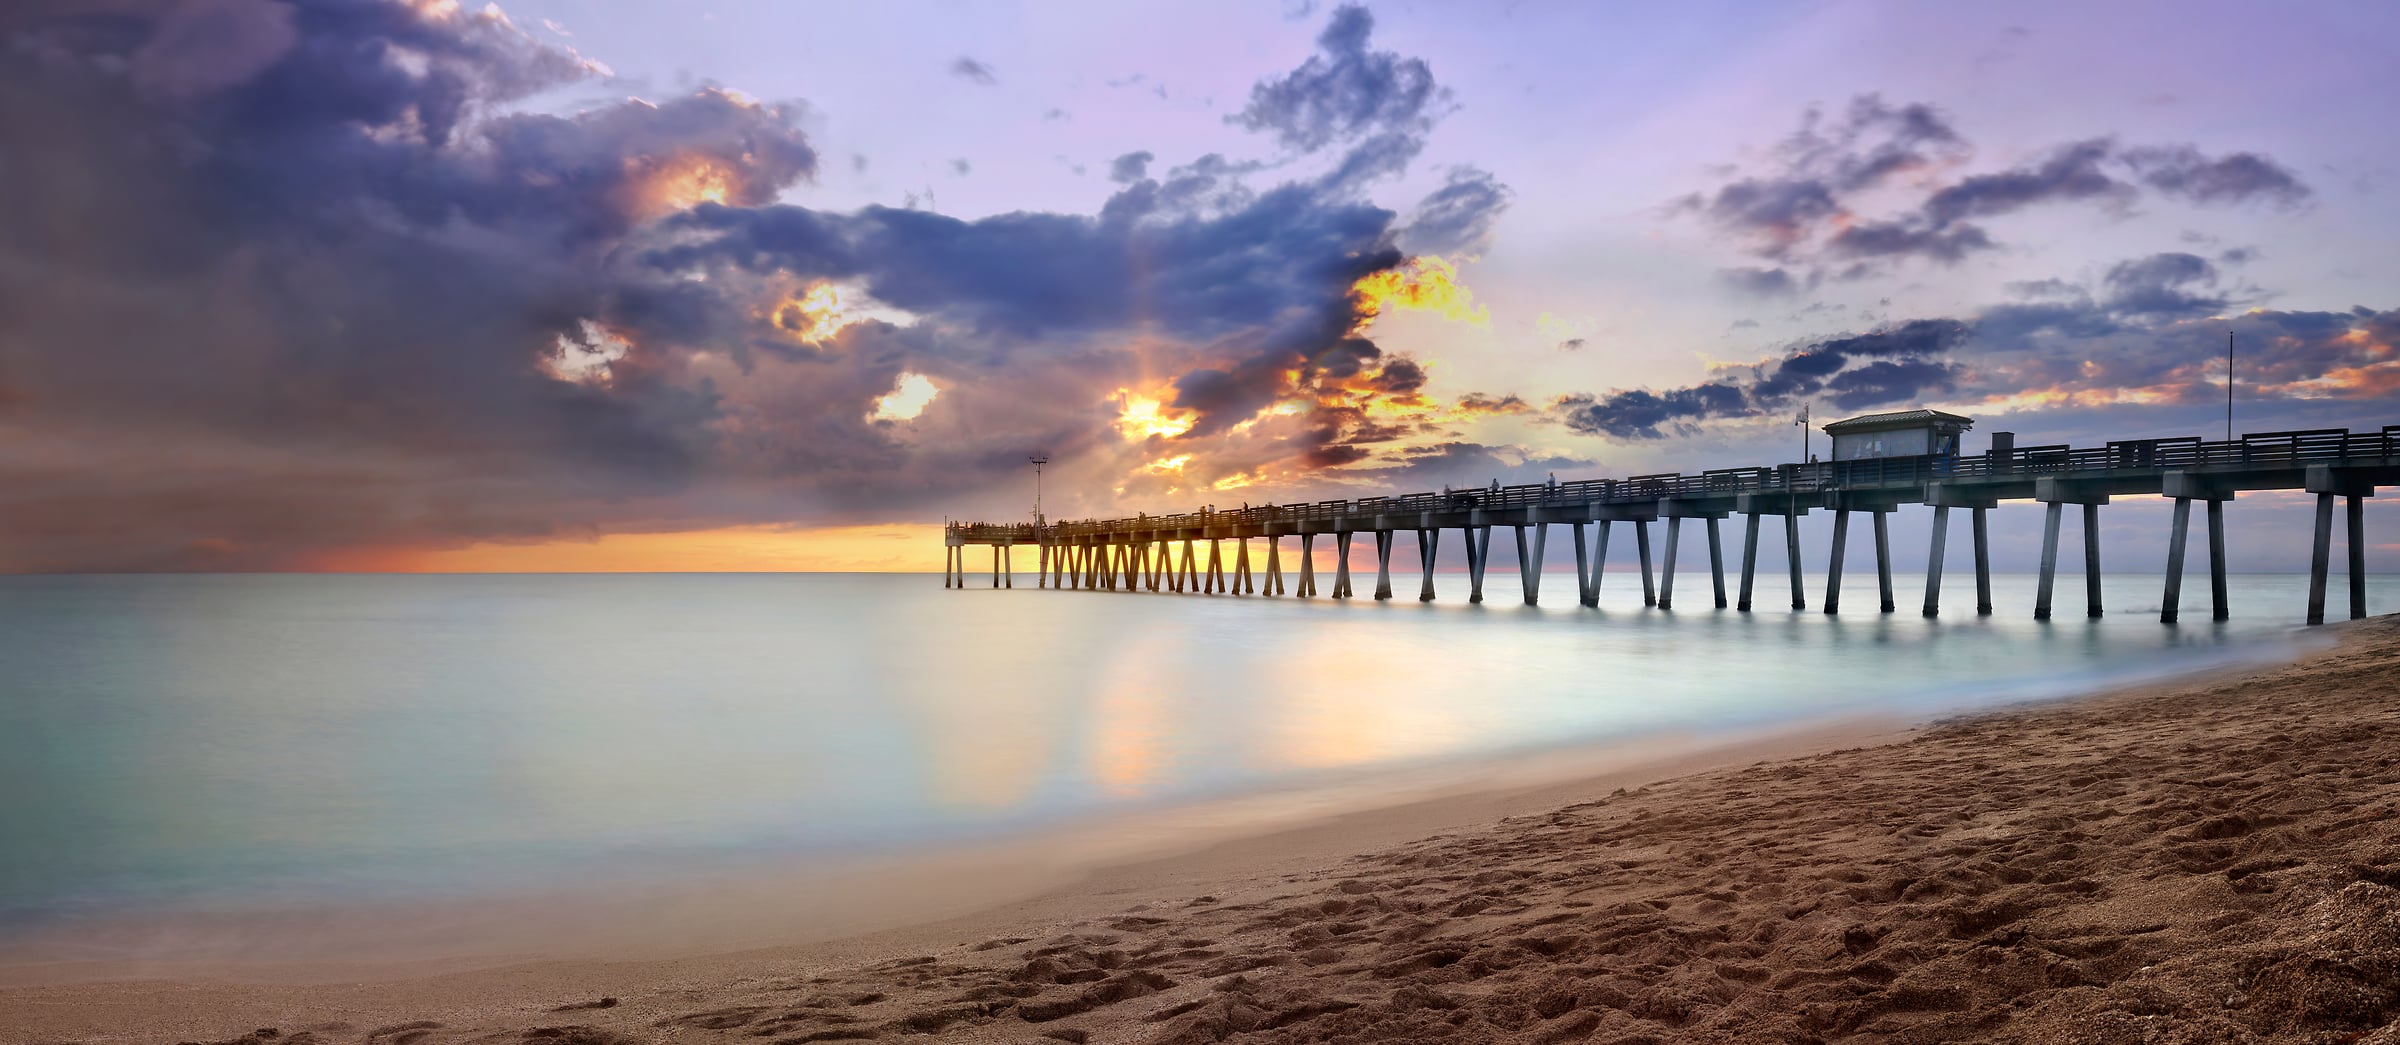 188 megapixels! A very high resolution, large-format VAST photo print of a fishing pier over the ocean at sunset; photograph created by Phil Crawshay in Venice Fishing Pier, Venice, Florida.